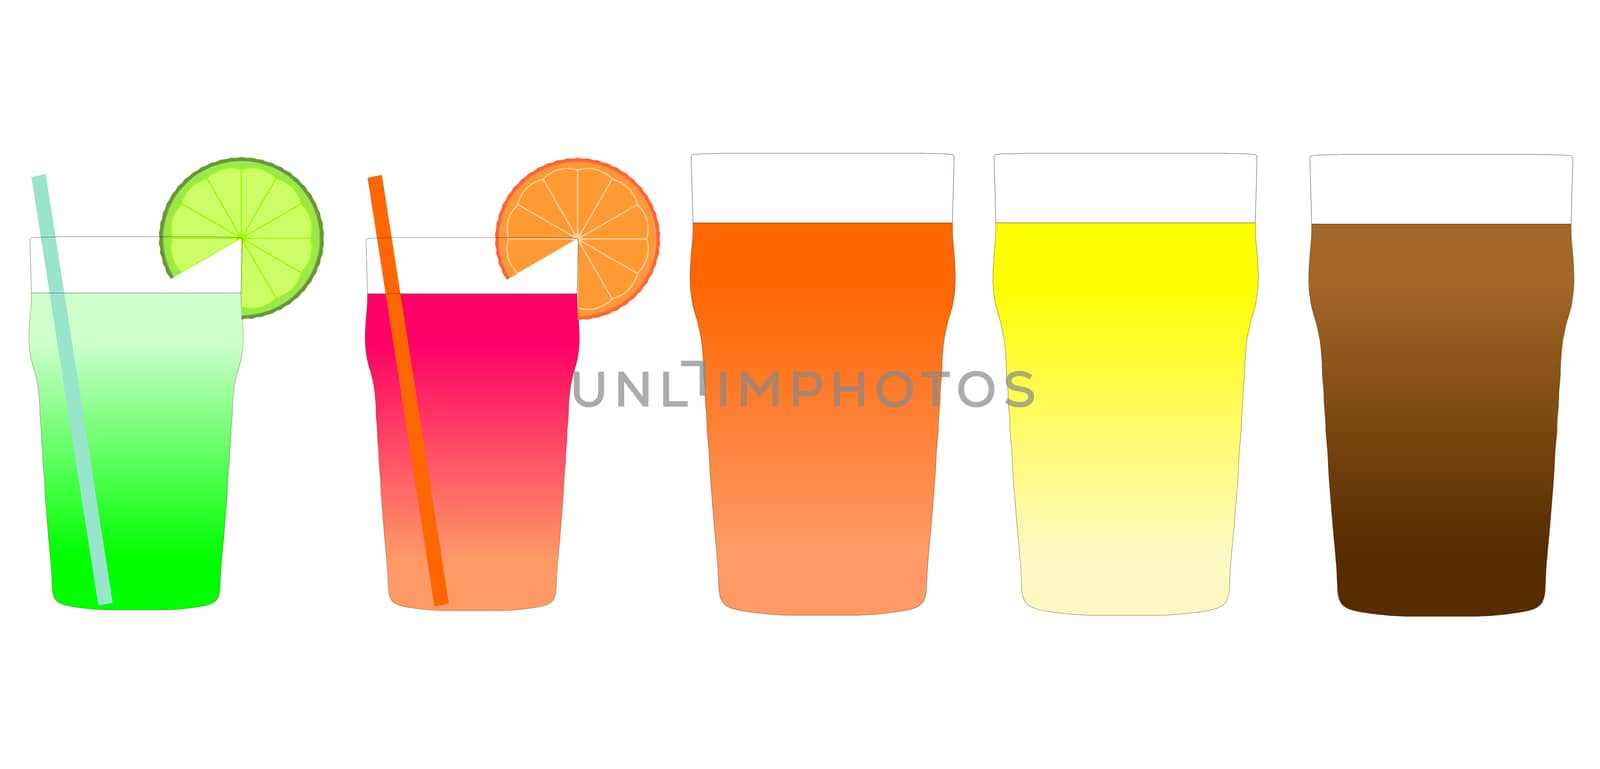 Cocktail and beer illustration by claudiodivizia